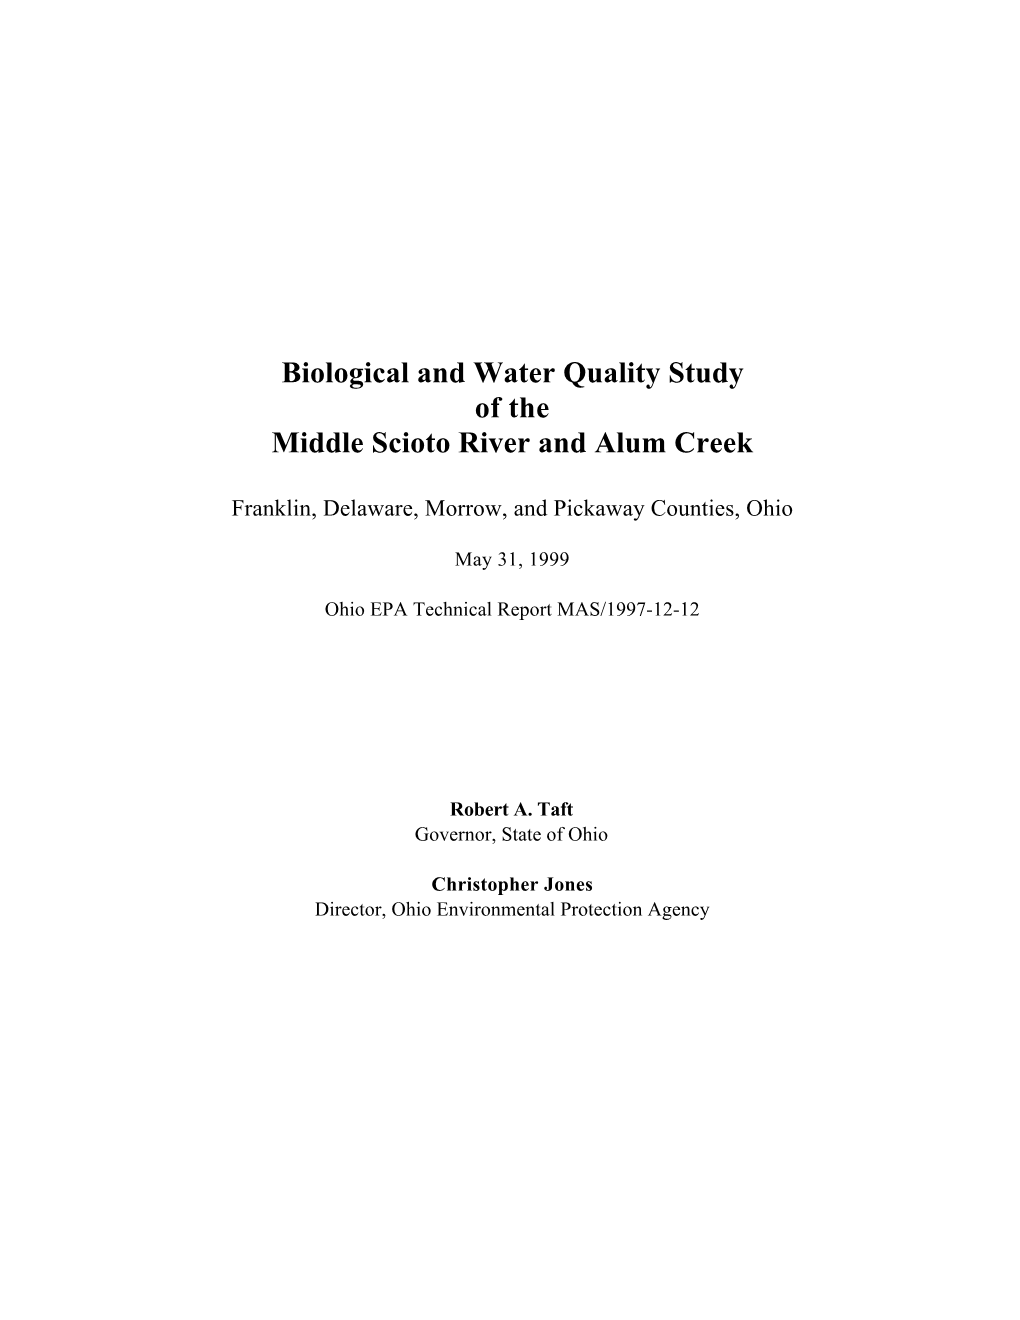 Biological and Water Quality Study of the Middle Scioto River and Alum Creek